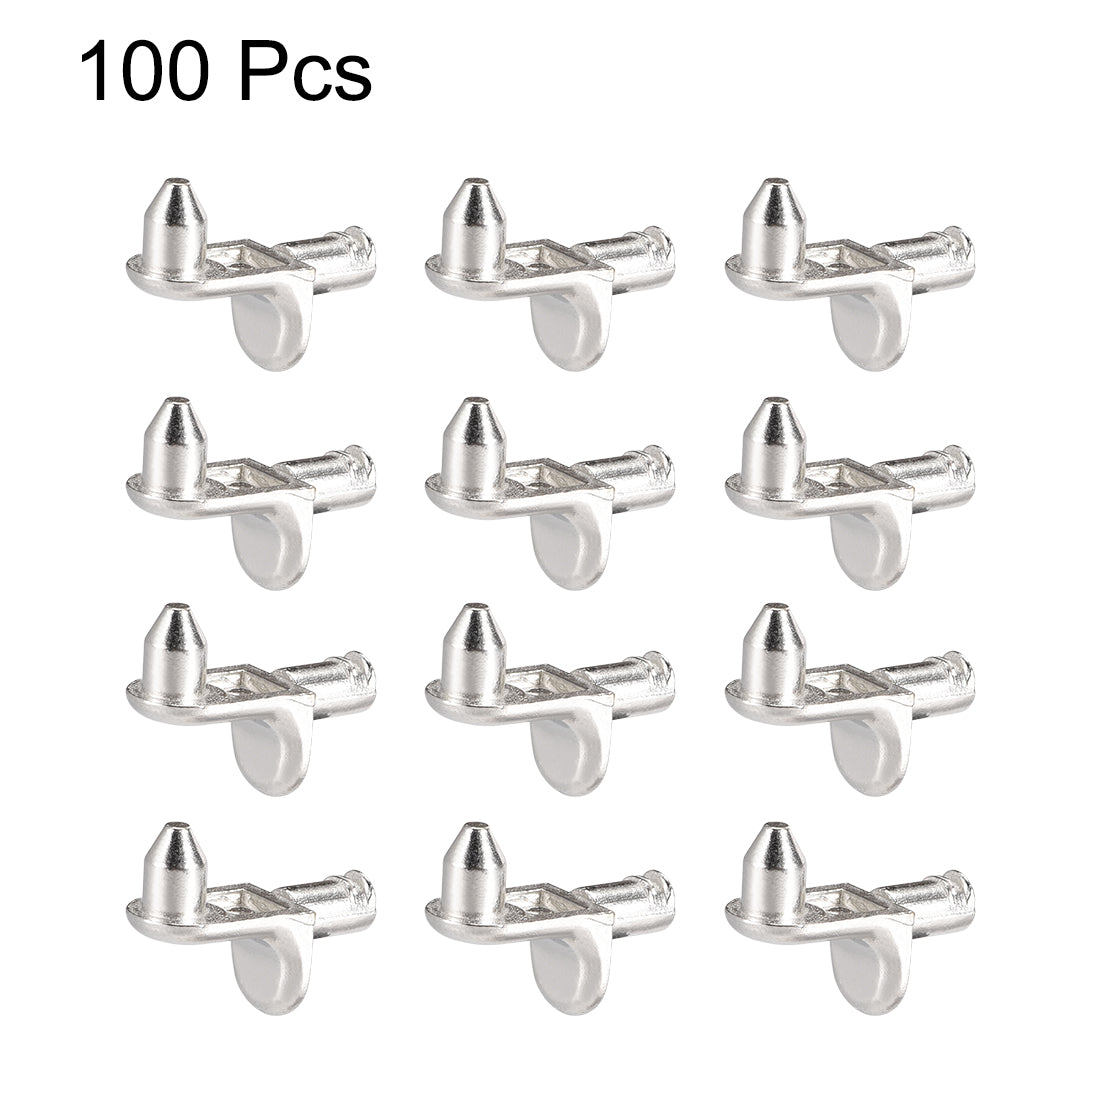 uxcell Uxcell Shelf Support Peg,5mm L-Shaped Support, Furniture Cabinet Shelf,Bracket Pegs with Pin,for Kitchen Furniture Book Shelves Supplies,Silver Tone 100pcs